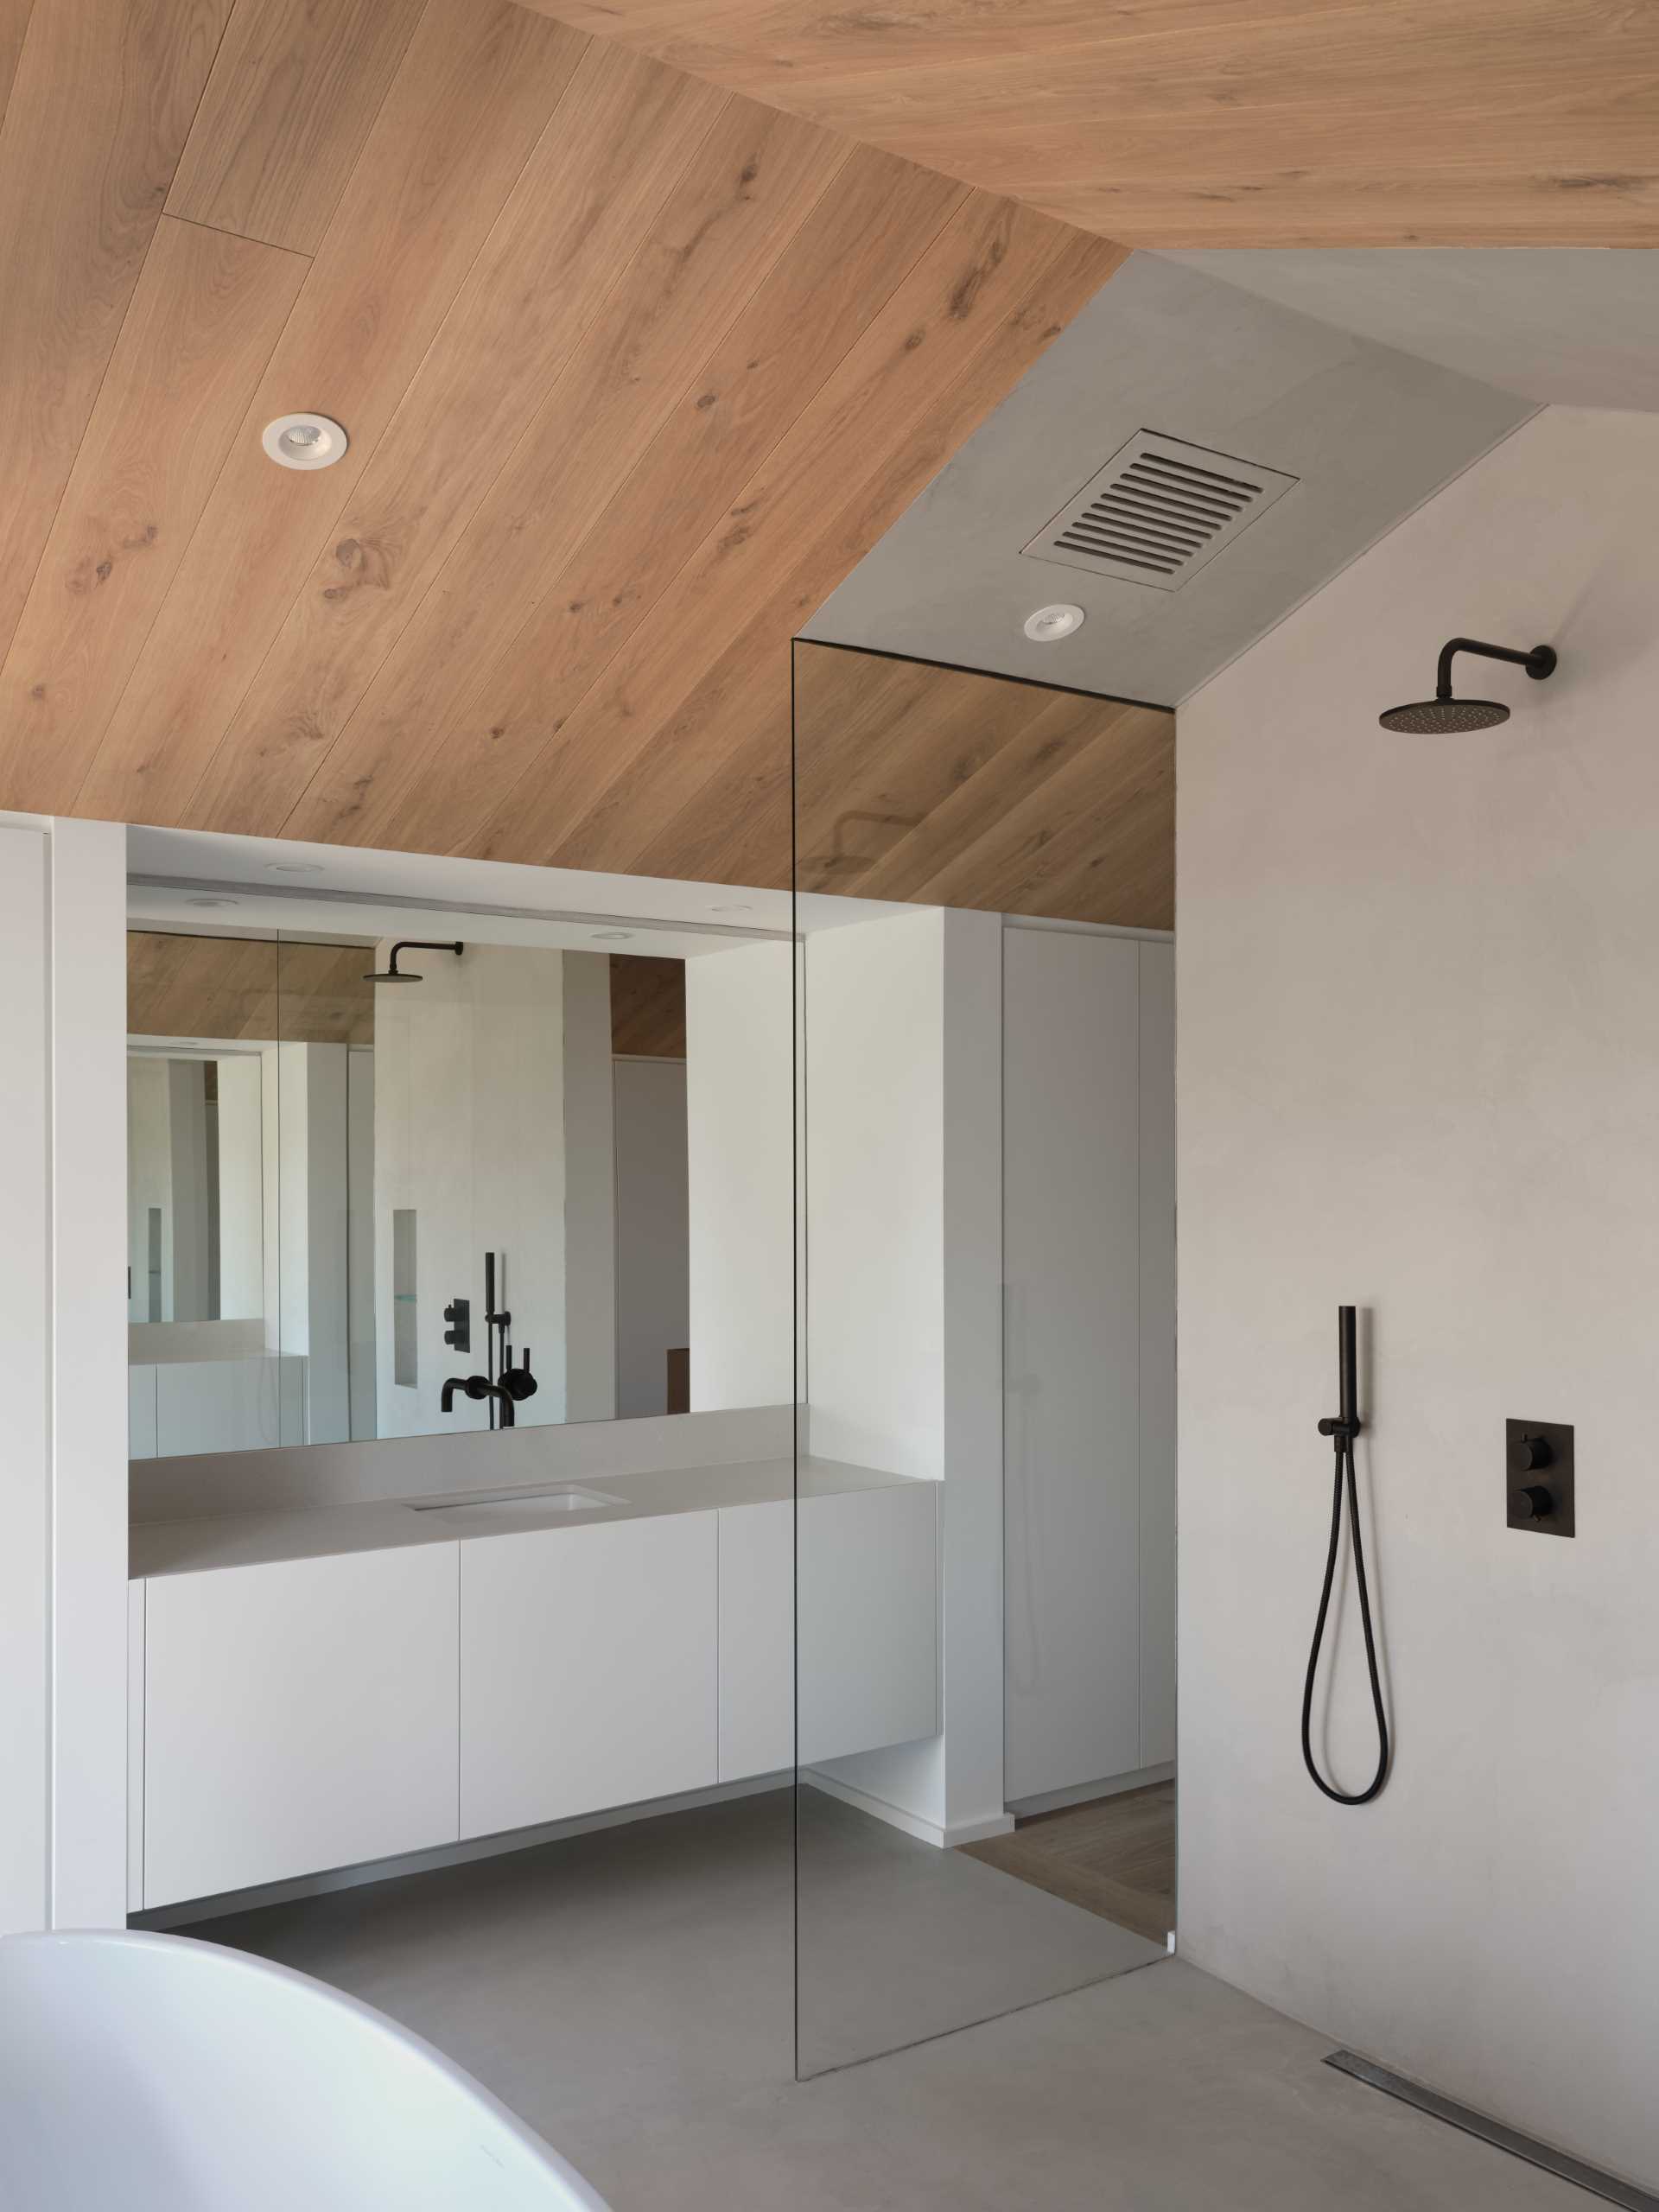 This primary bathroom has a walk-in shower and a large vanity with cabinetry on either side, while a freestanding bathtub is positioned by the window that looks out to a private deck.